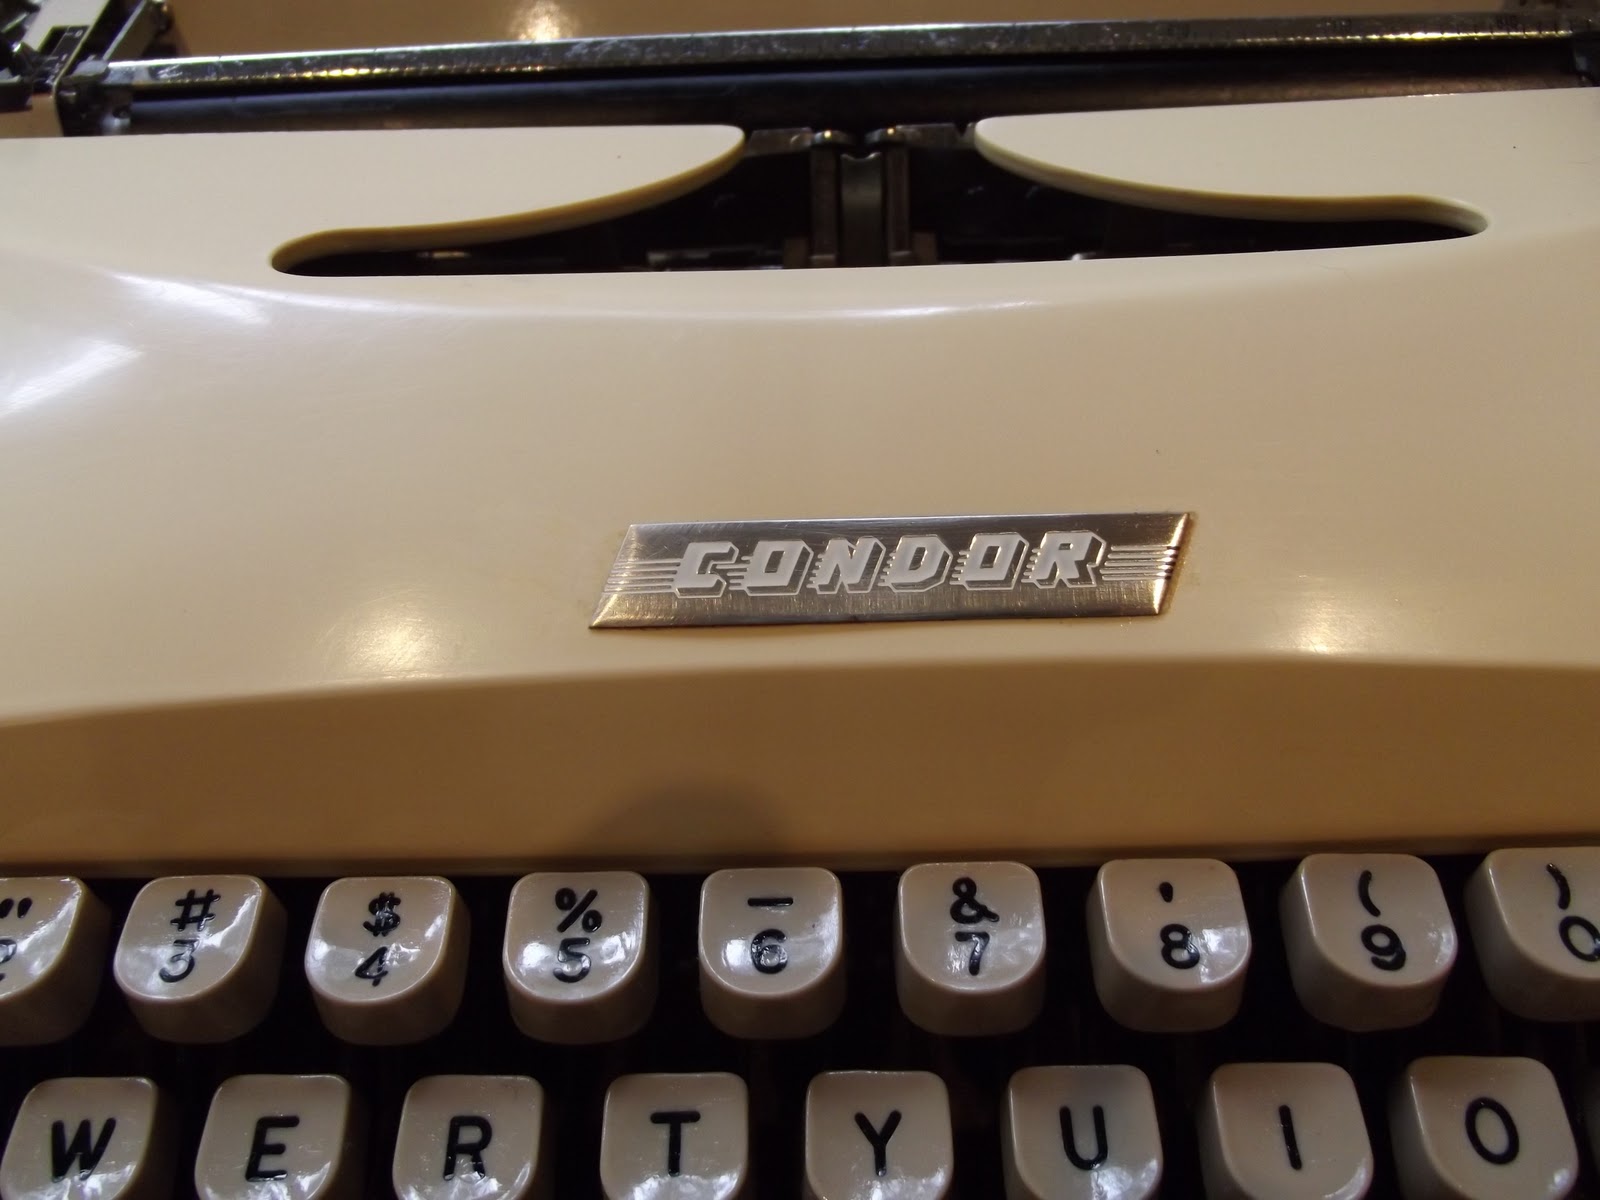 oz.Typewriter: The Condor Has Landed! My Mysterious New Typewriter